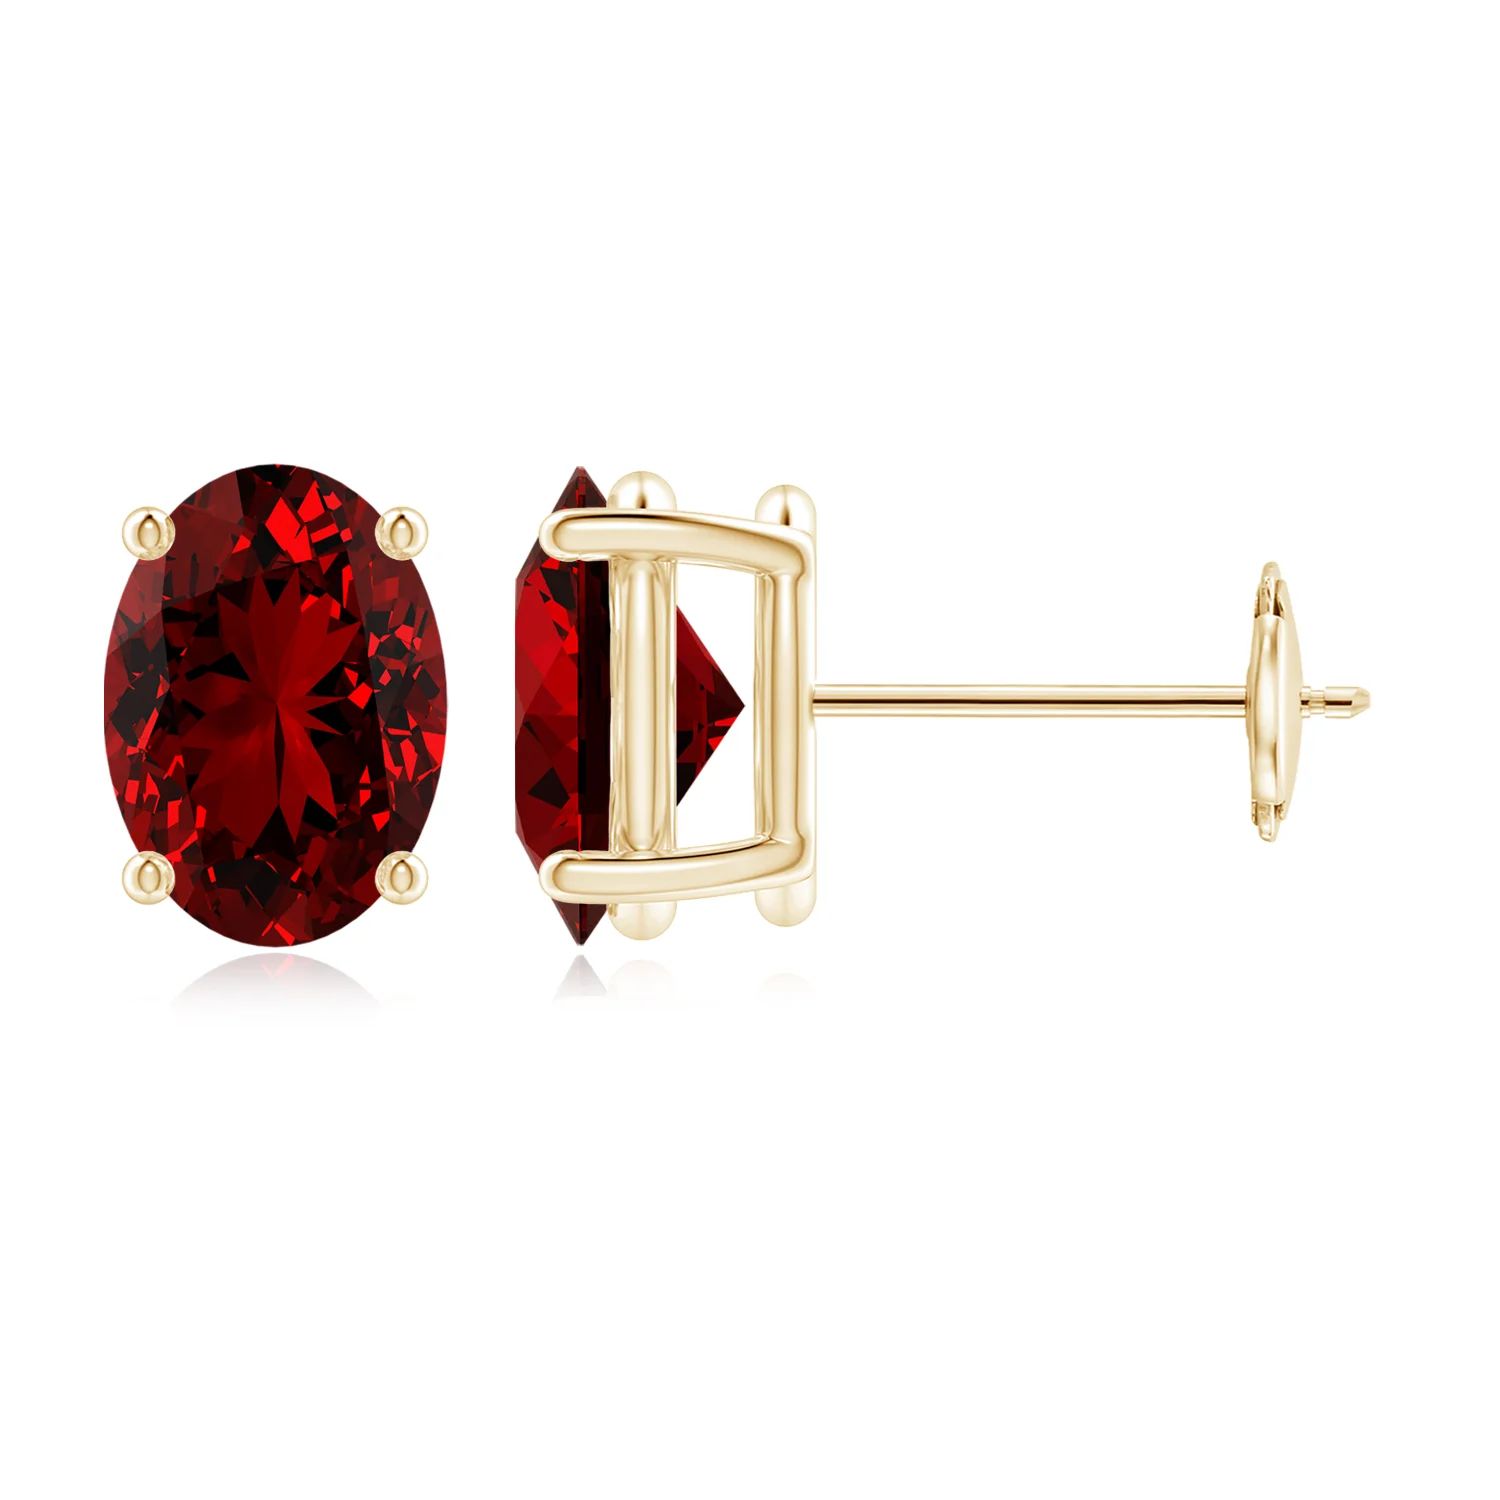 Lab-Grown Prong-Set Solitaire Oval Ruby Stud Earrings | Angara US